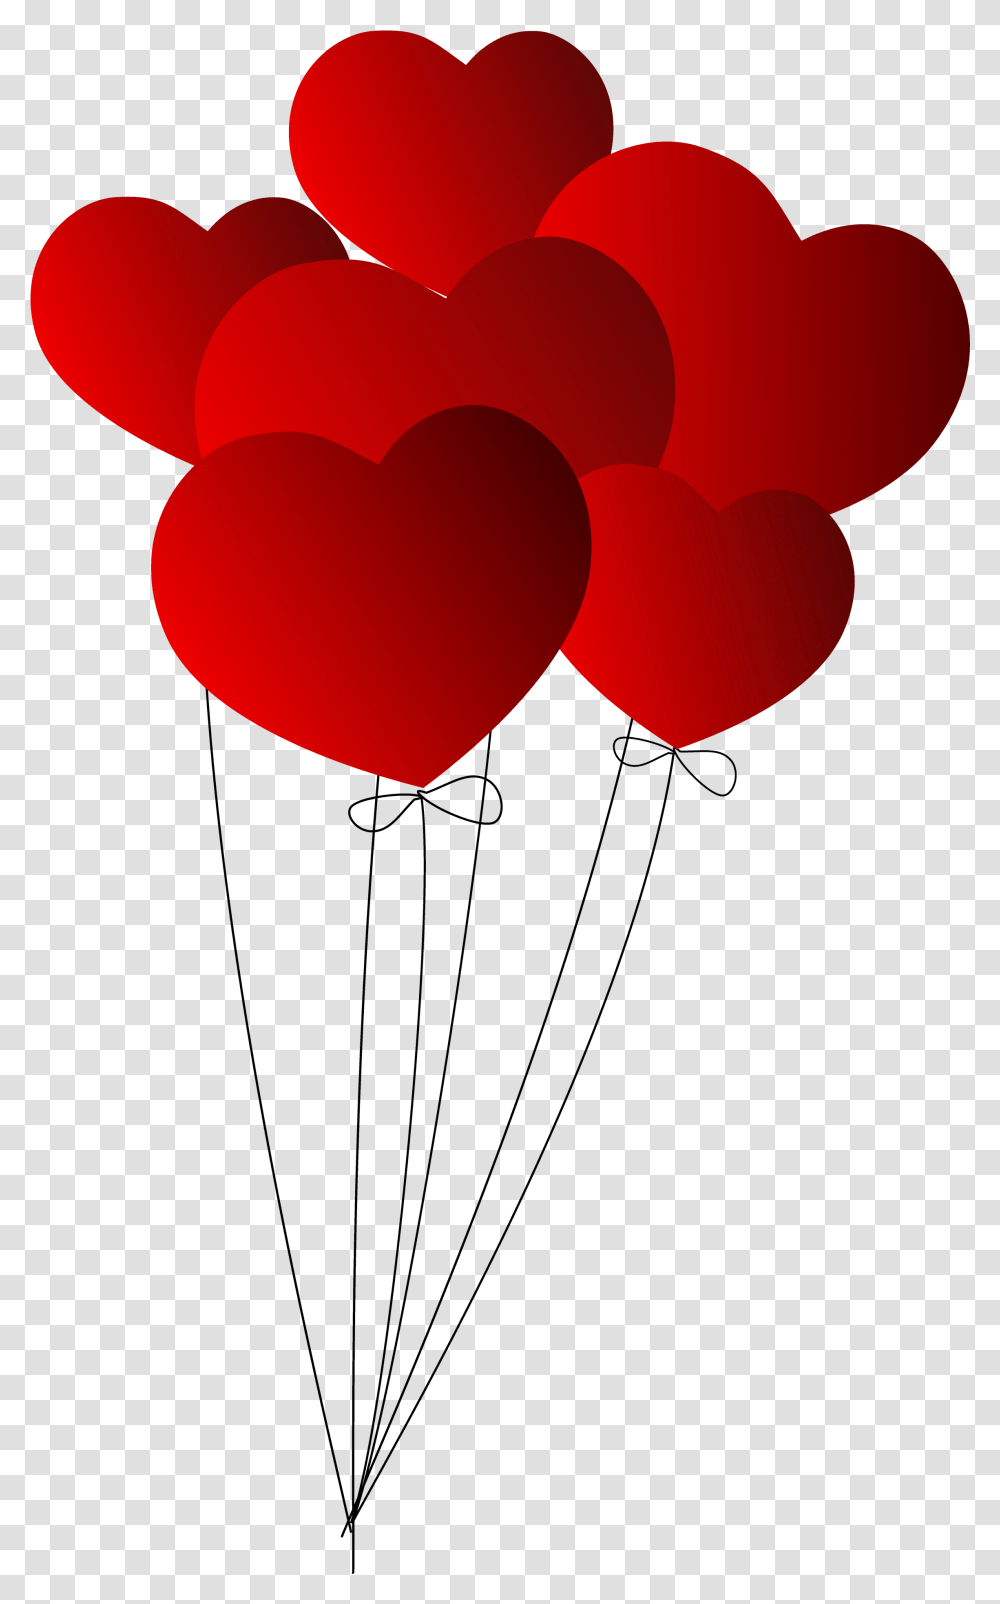 Download Free Heart Balloon Lithuania Mid Fairfield Project Heart Shaped Balloon, Plant, Flower, Blossom, Rose Transparent Png